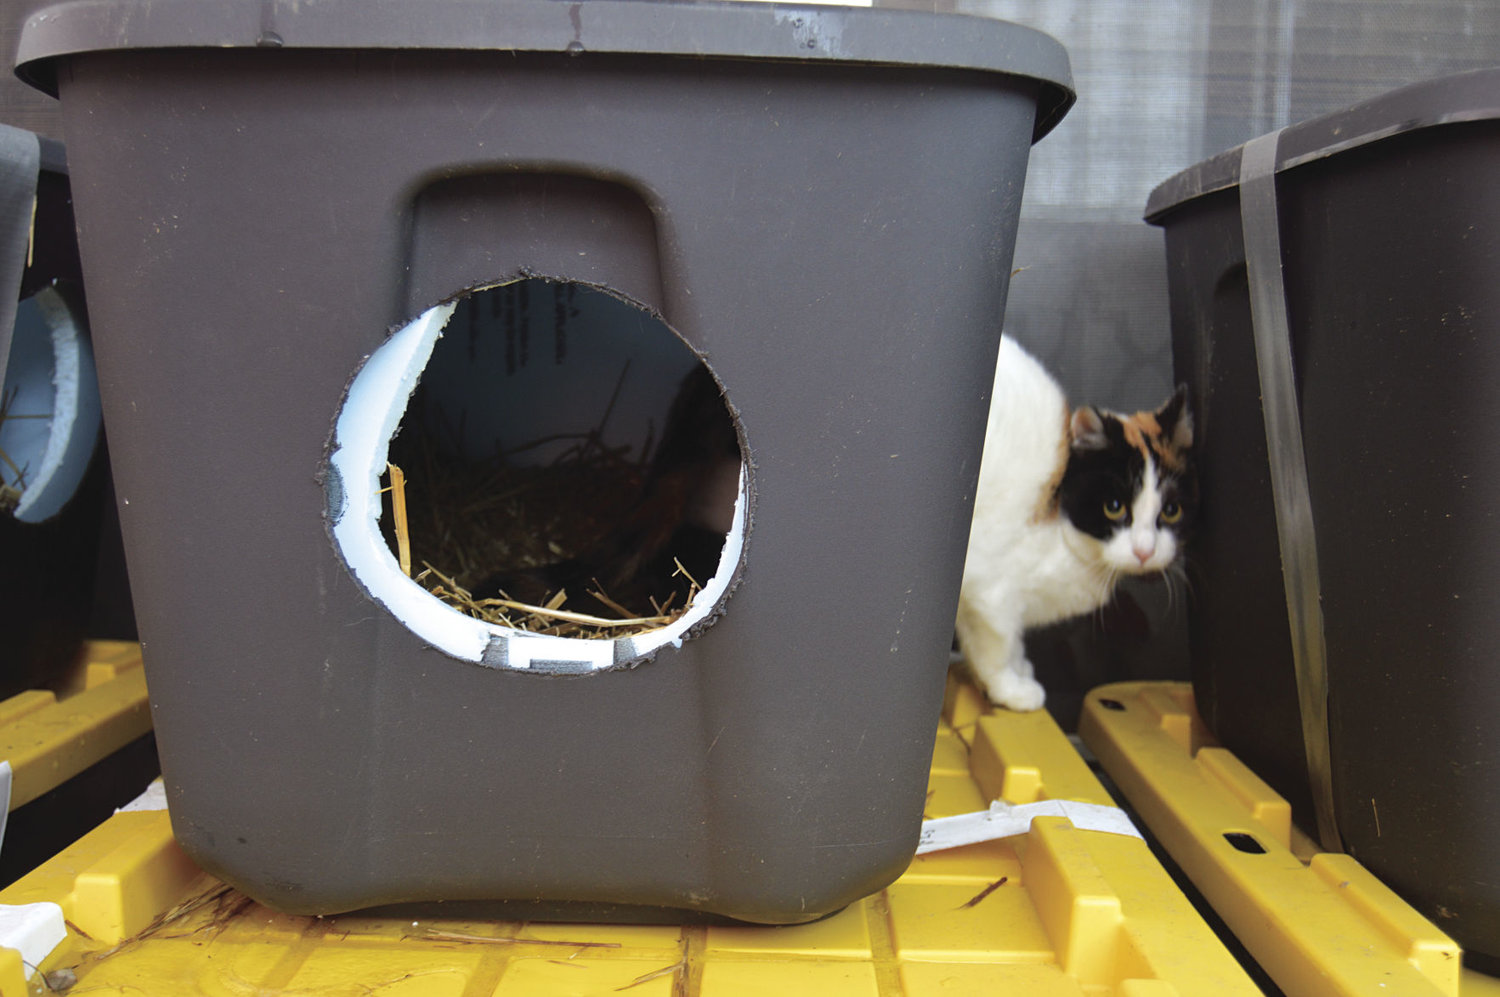 Stray cats seek warmth in 200 homemade shelters